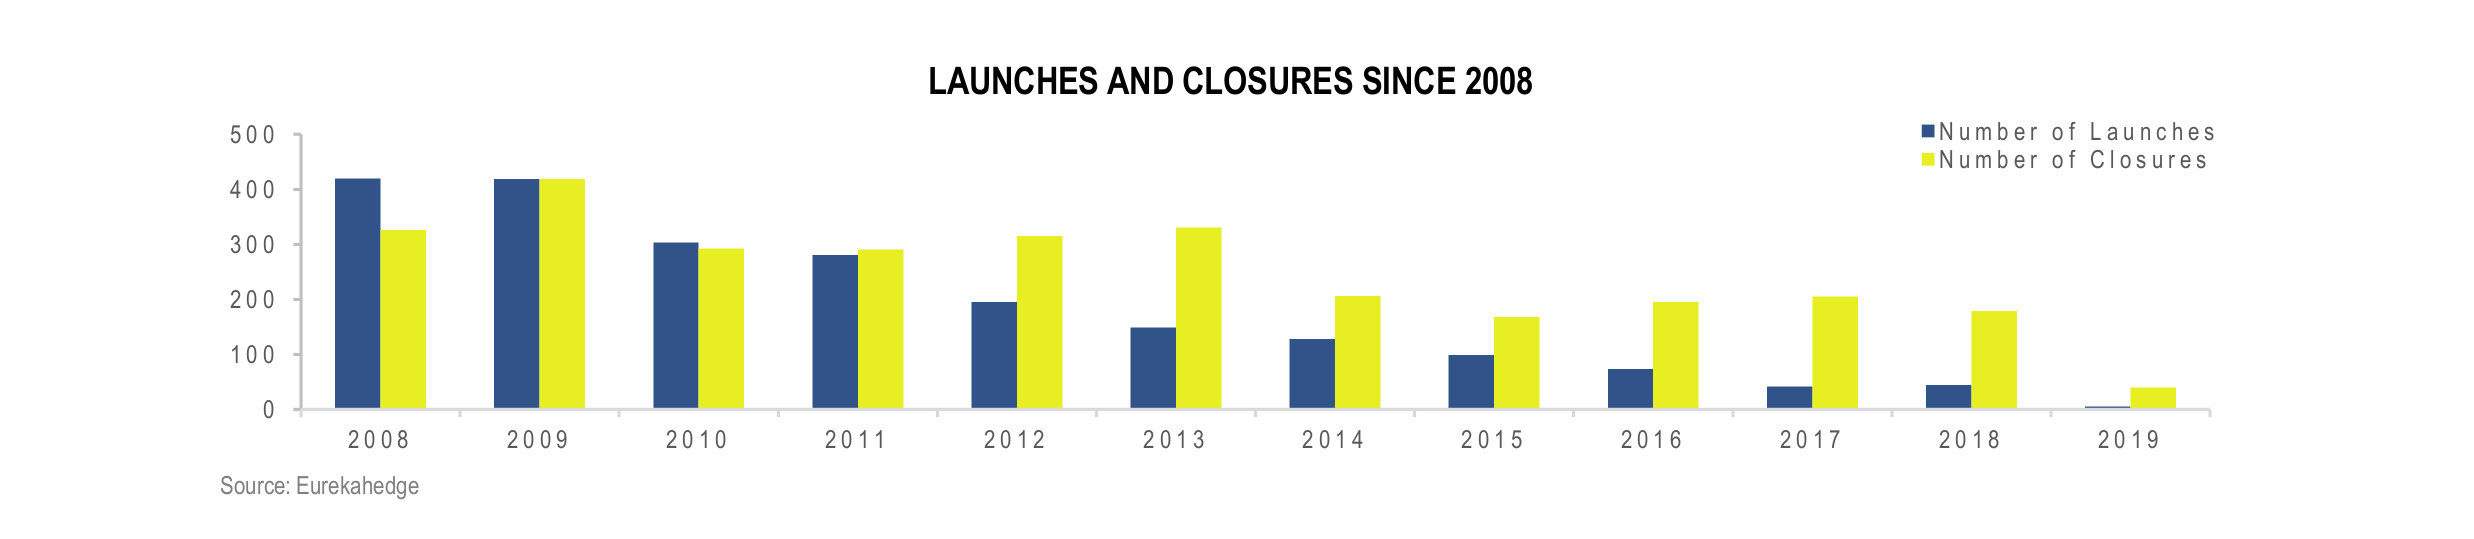 Funds of Hedge Funds Infographic June 2019 - launches and closures